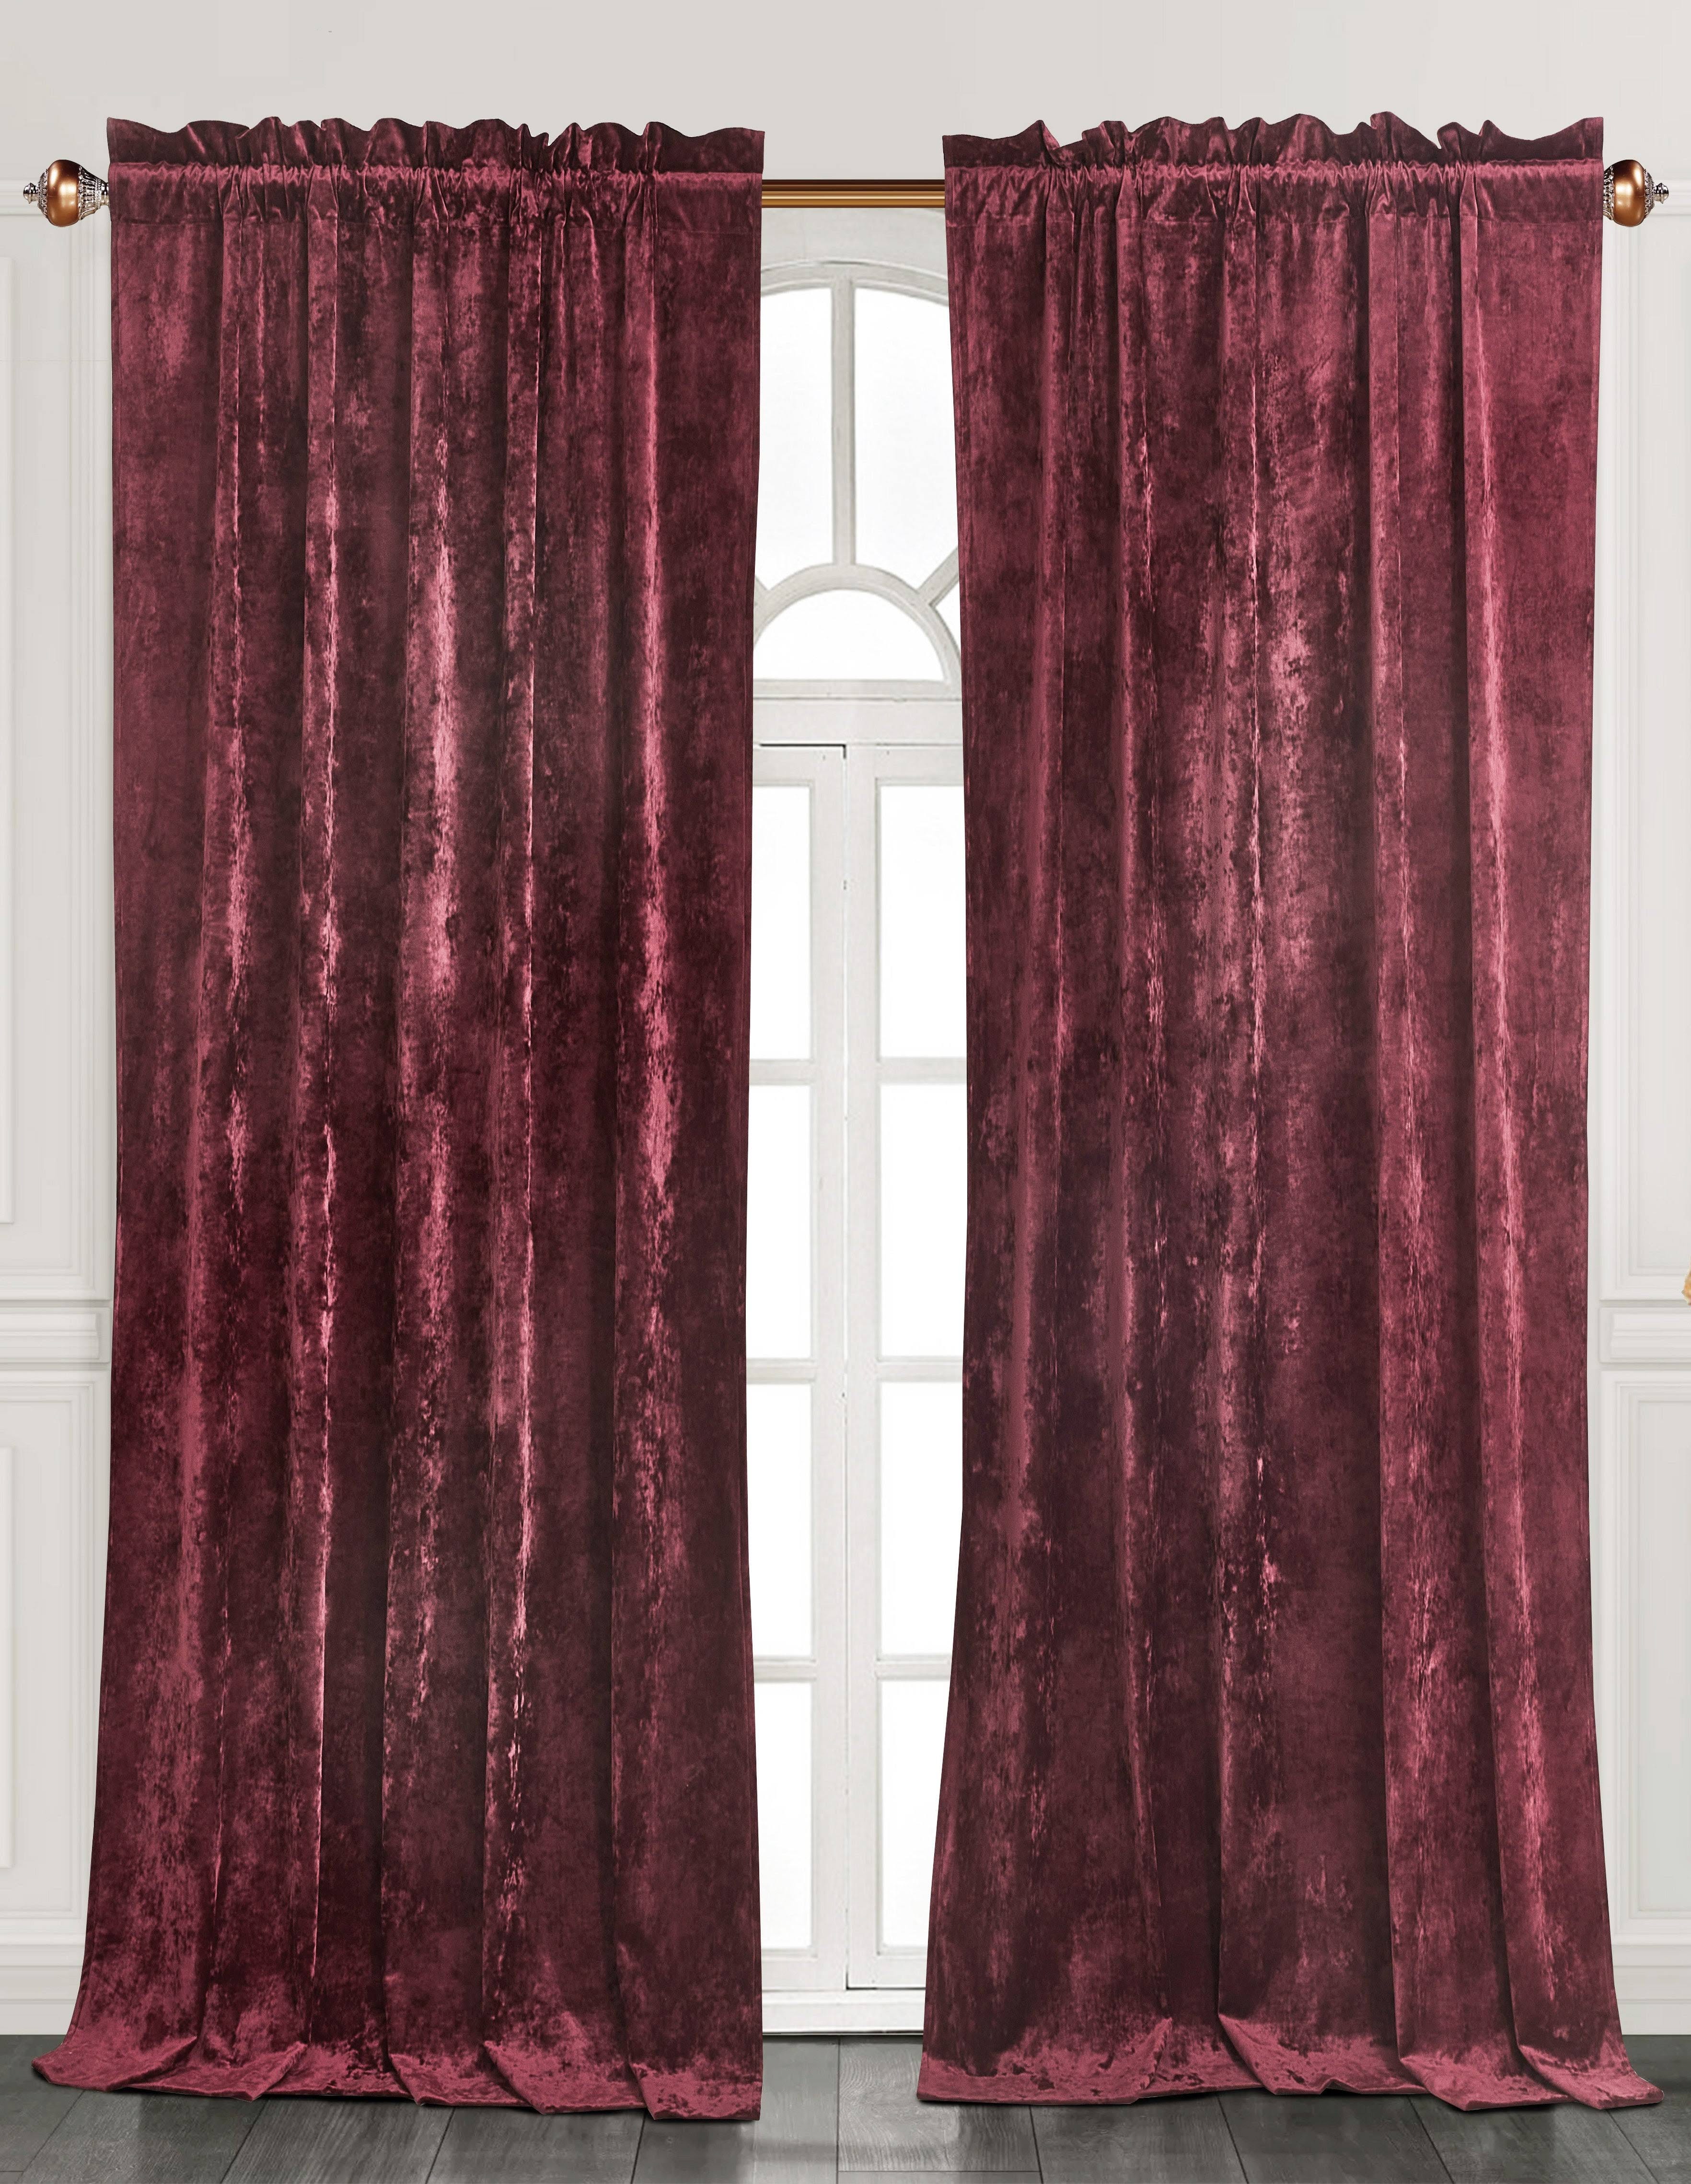 Luxury Distressed Red Velvet Curtains for Living Space | Image